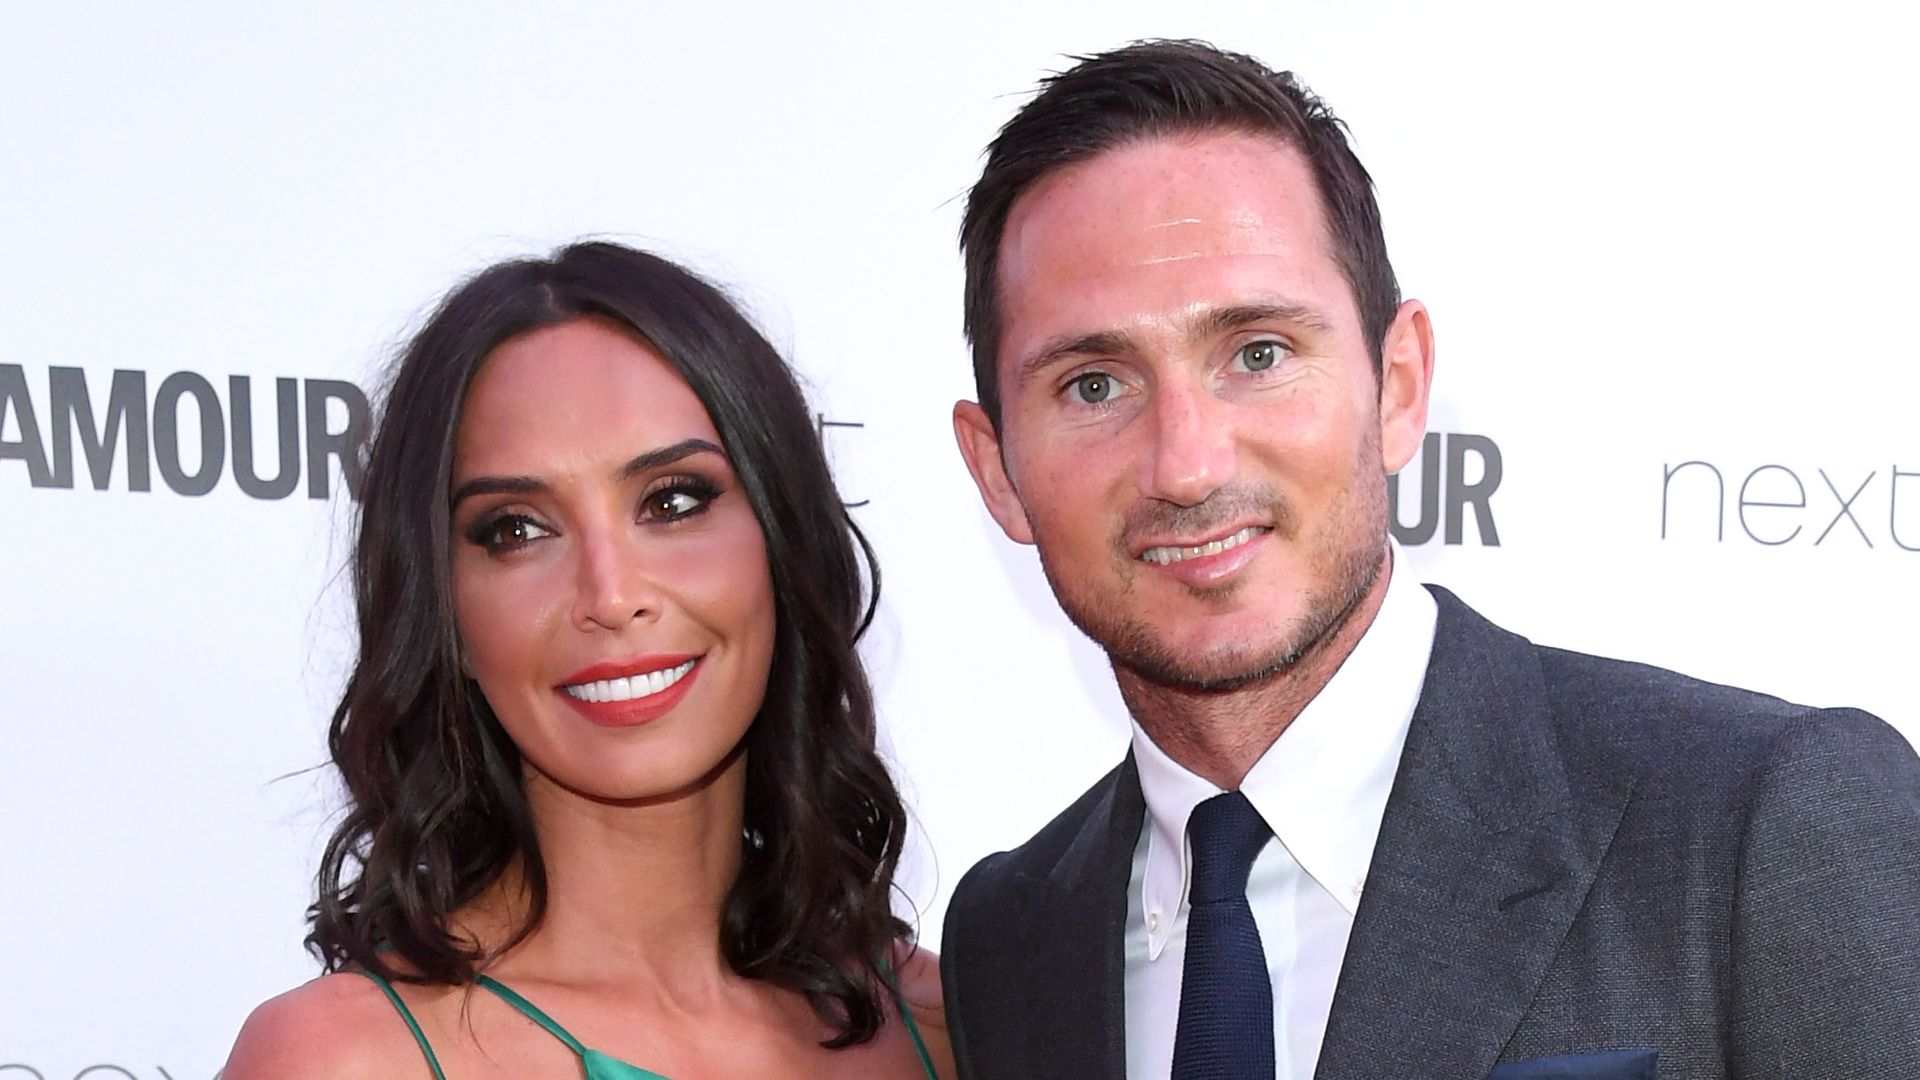 LONDON, ENGLAND - JUNE 06:  Christine Bleakley and Frank Lampard attend the Glamour Women of The Year Awards 2017 at Berkeley Square Gardens on June 6, 2017 in London, England.  (Photo by Karwai Tang/WireImage)